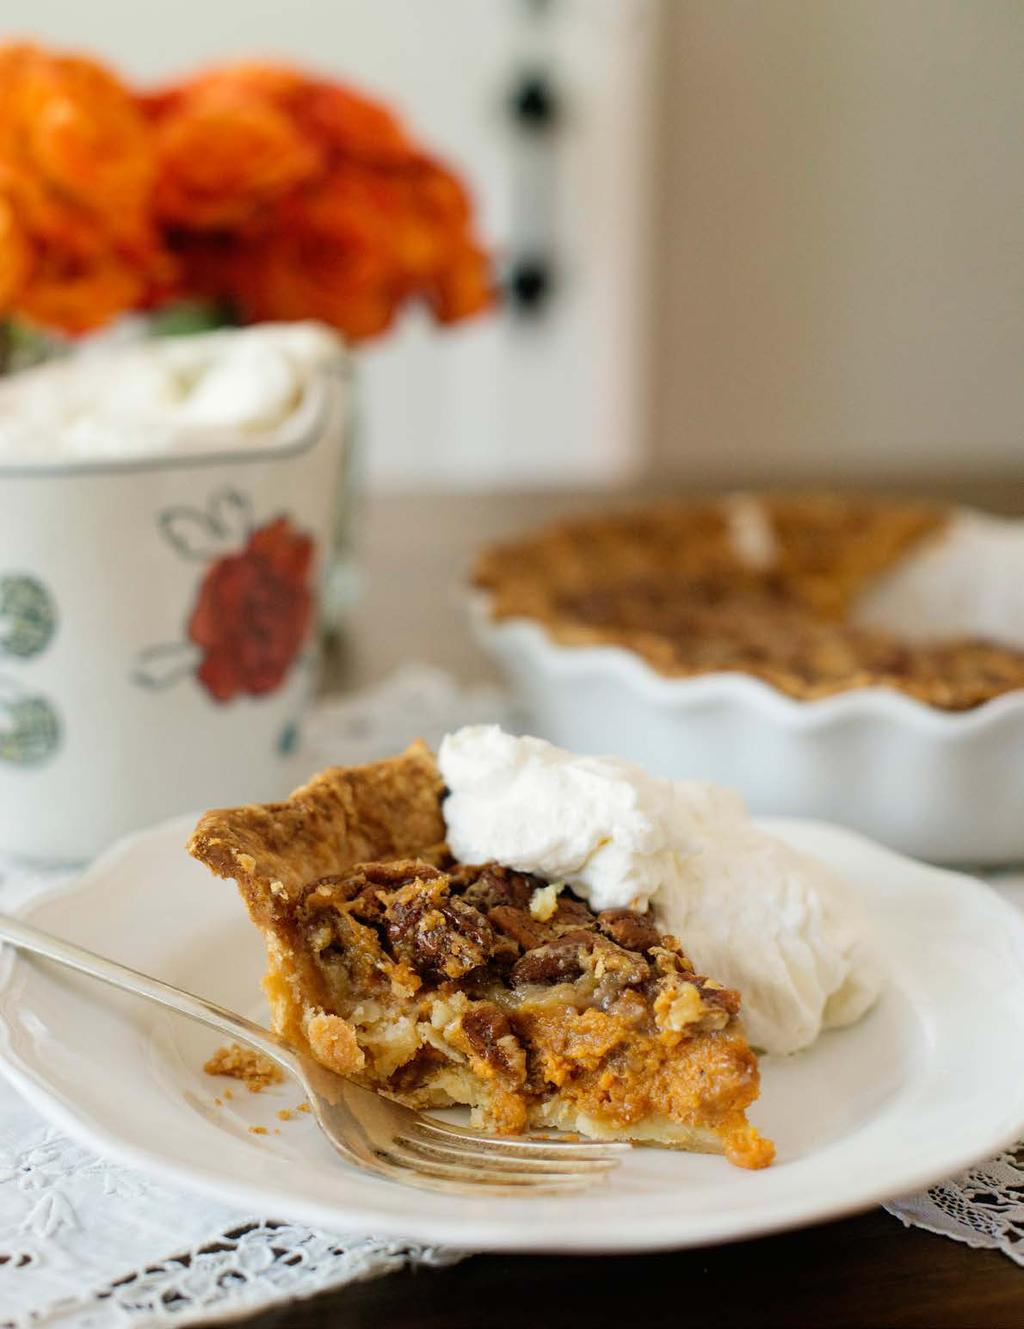 Make ahead: 1 day Pumpkin Pecan Pie If you can t decide whether you want pumpkin or pecan pie, make this one. It is a combination of both, so everyone ends up happy.